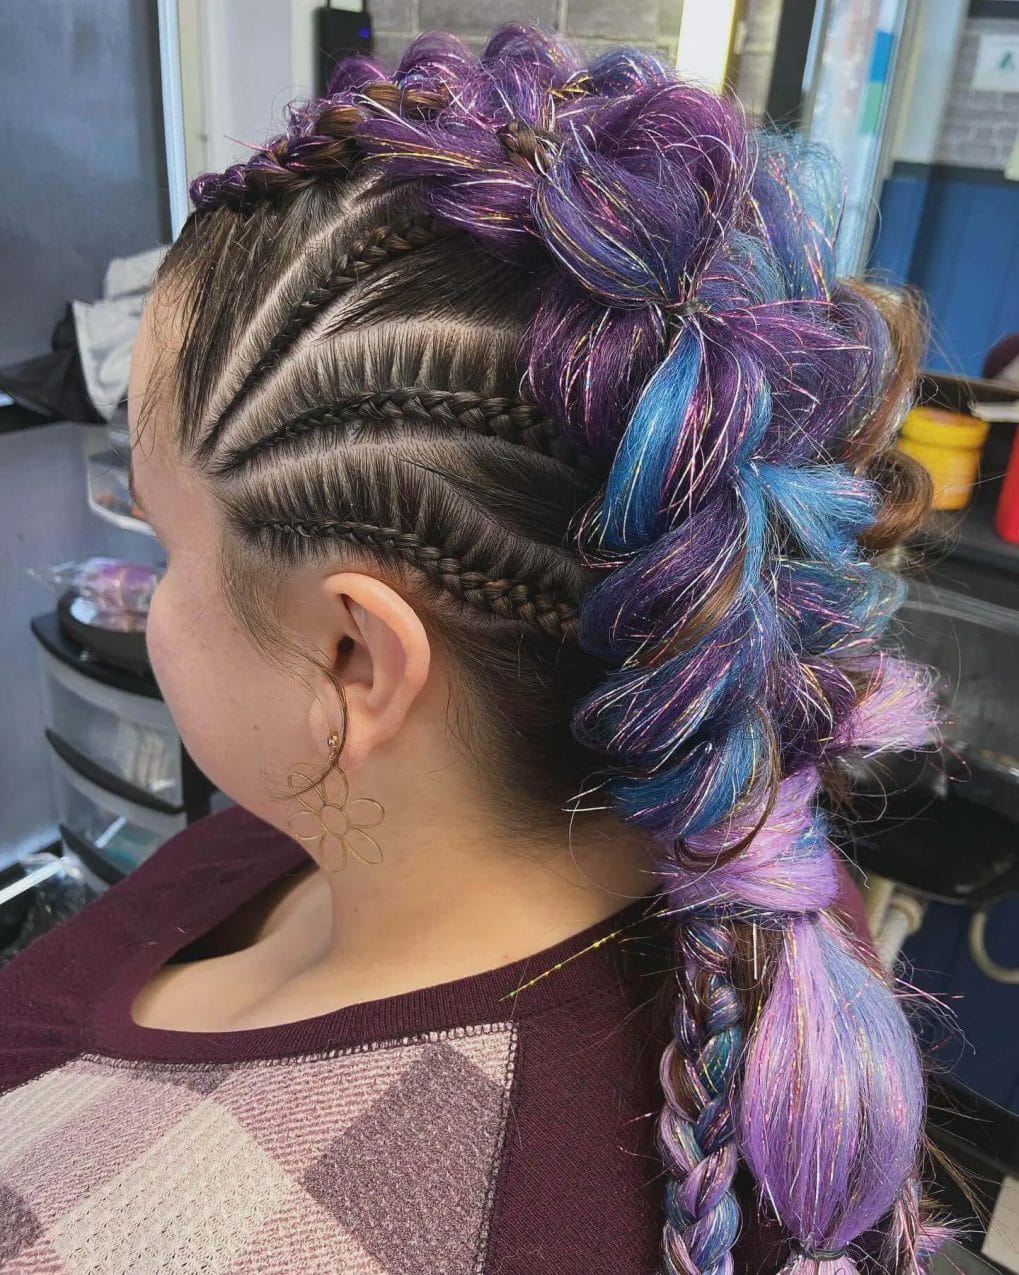 Cornrows that lead to a ponytail of twisted purple and blue braids